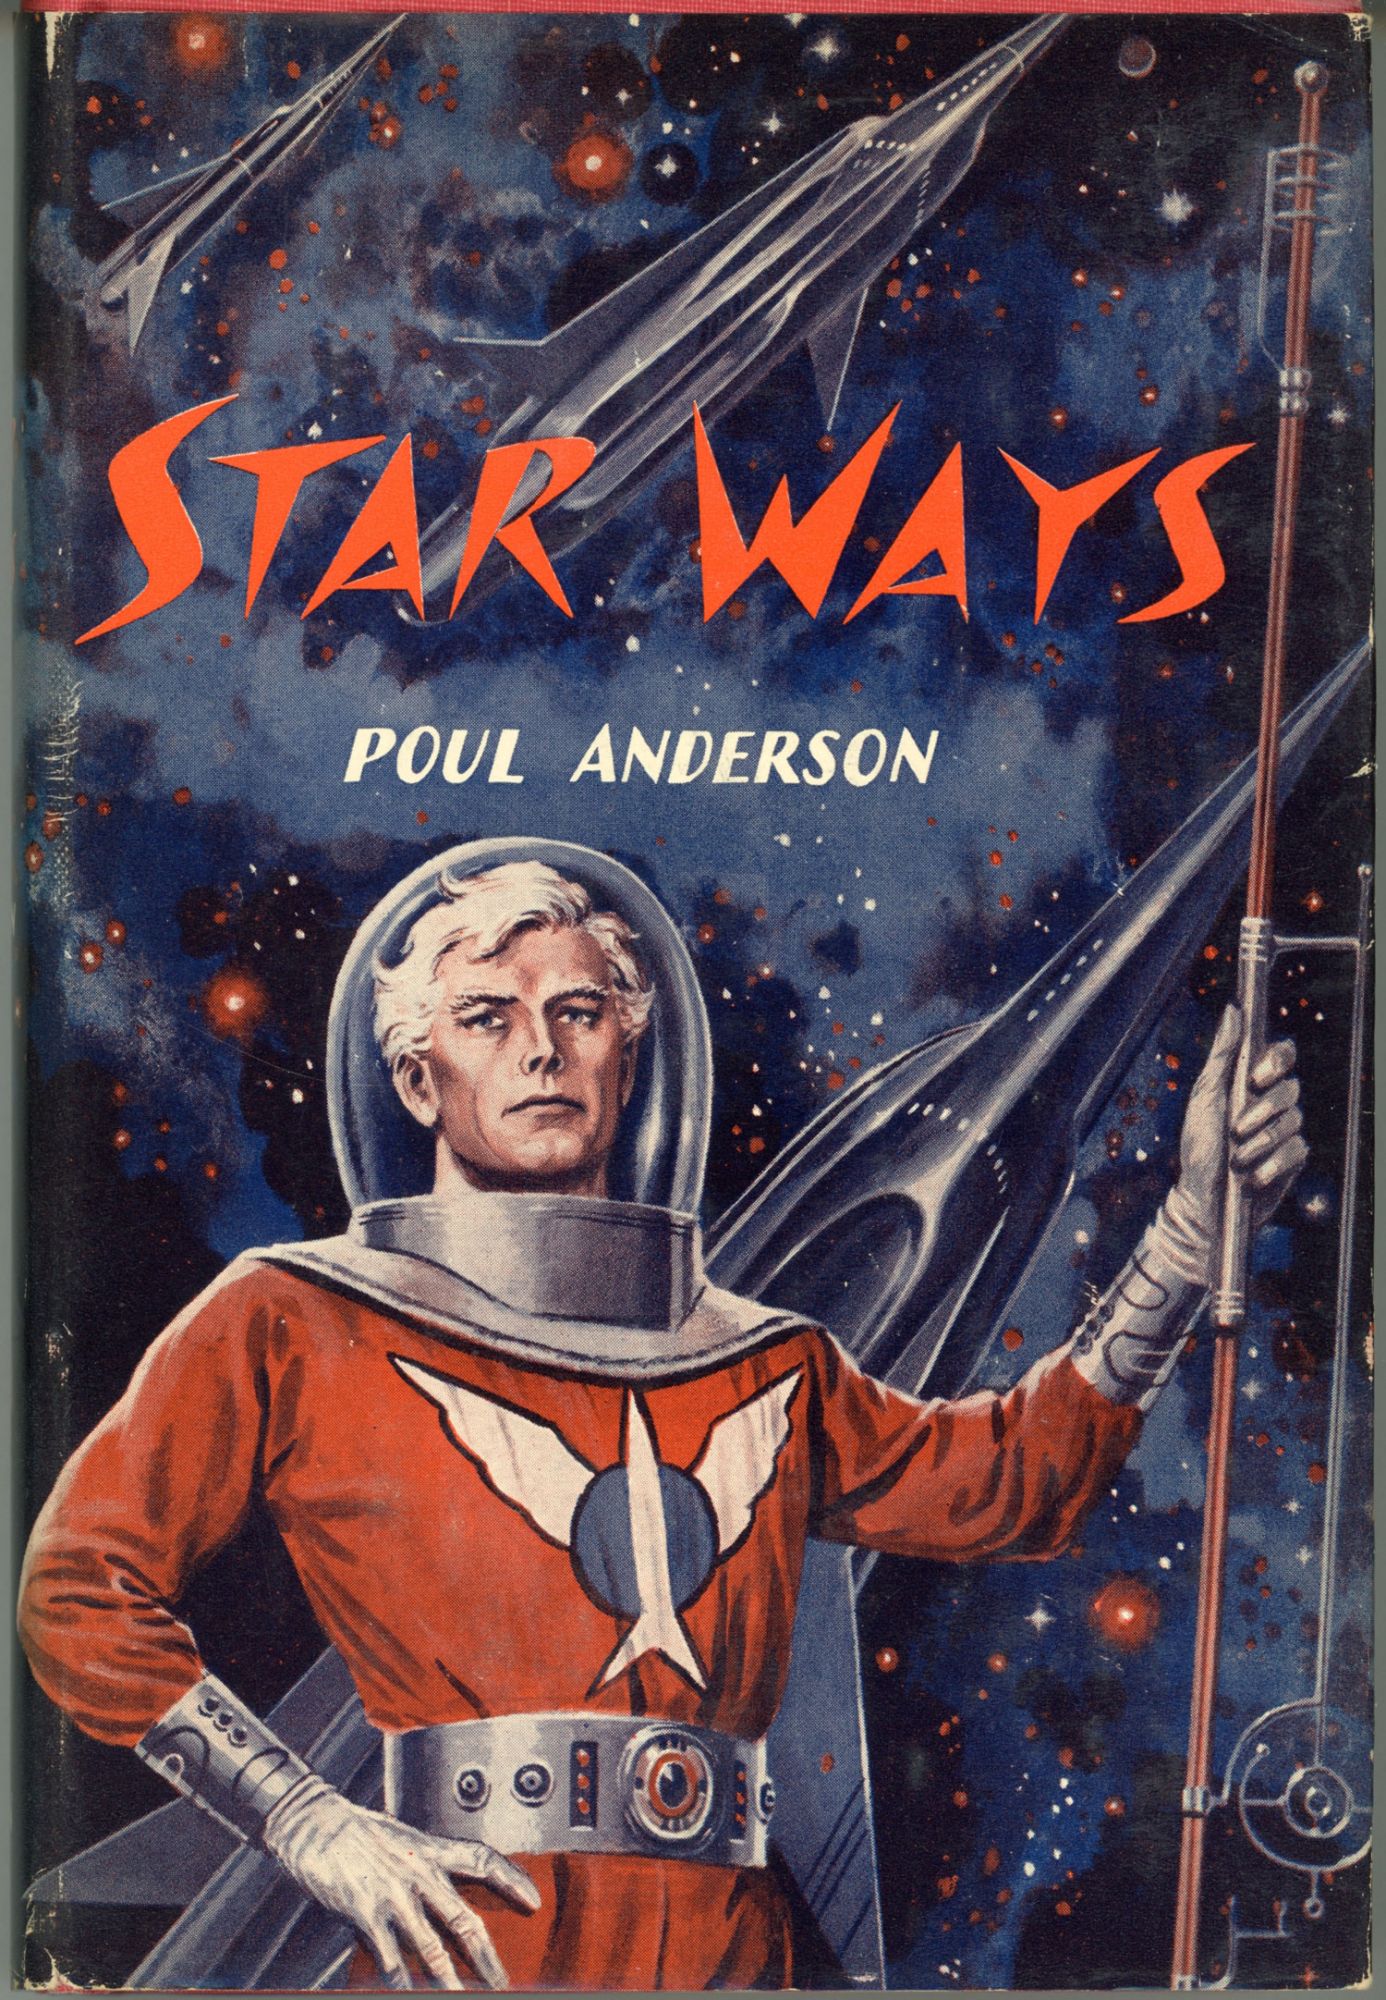 Image - dust jacket for Star Ways by Poul Anderson